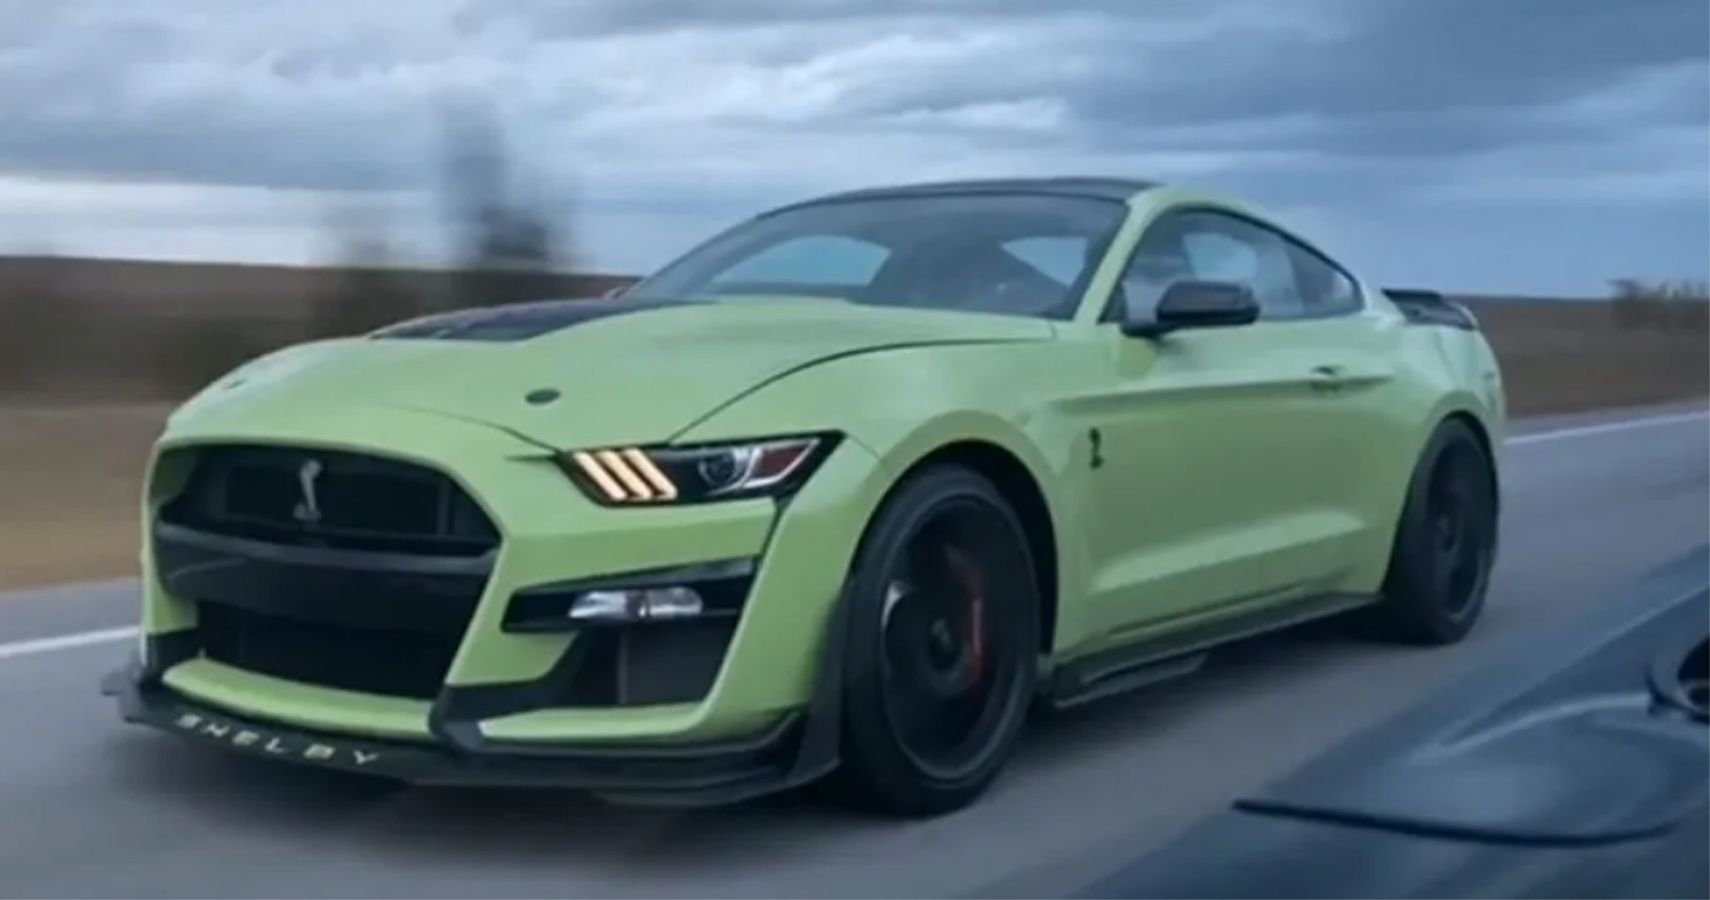 Ford Mustang Shelby GT500 took on two Corvettes in a street race